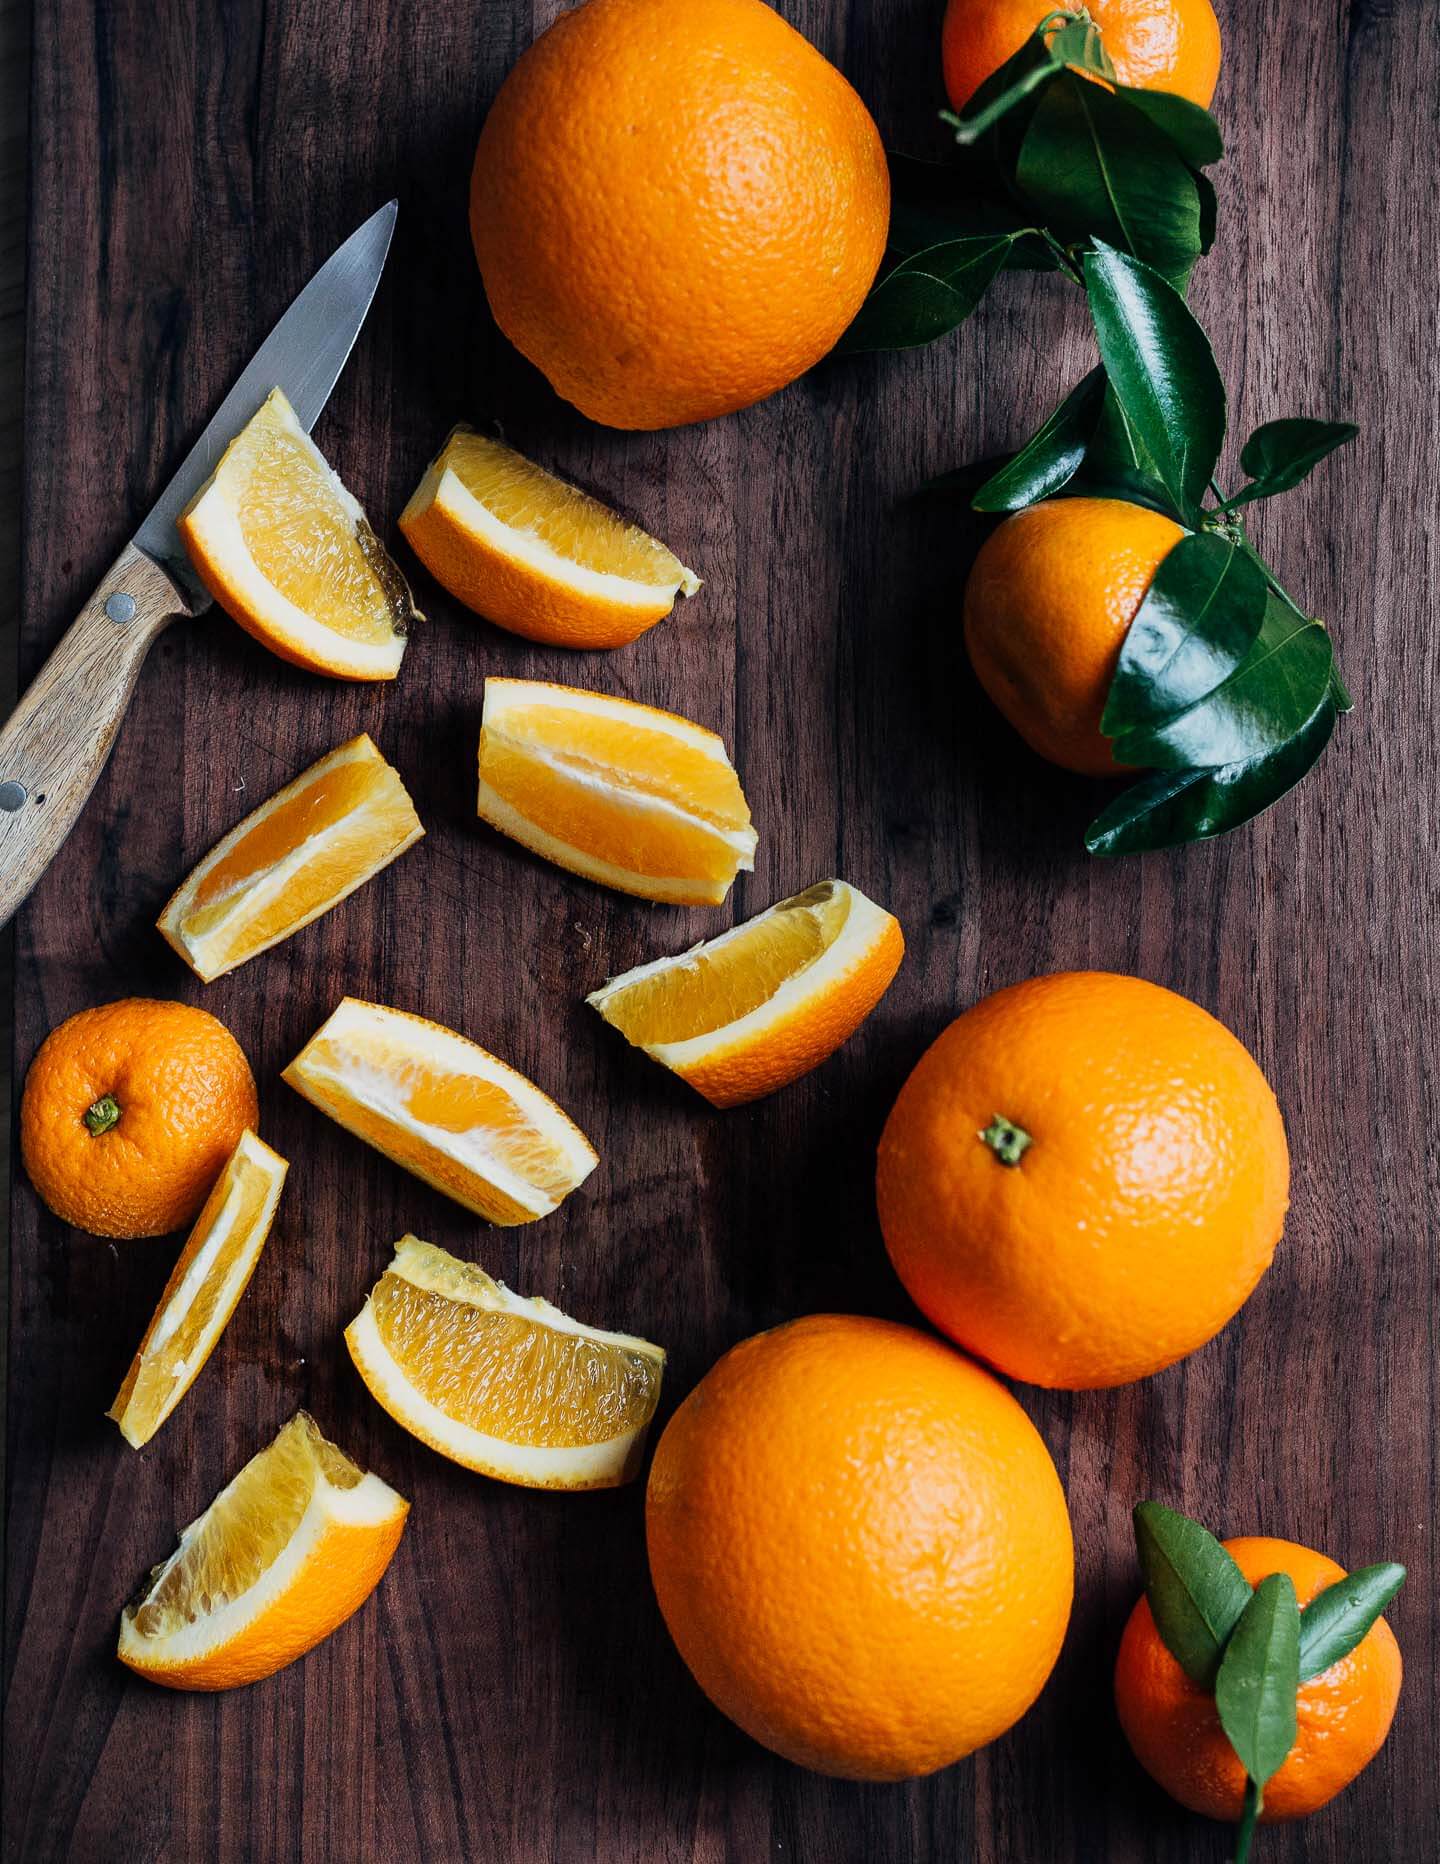 A cutting board with whole and sliced oranges.